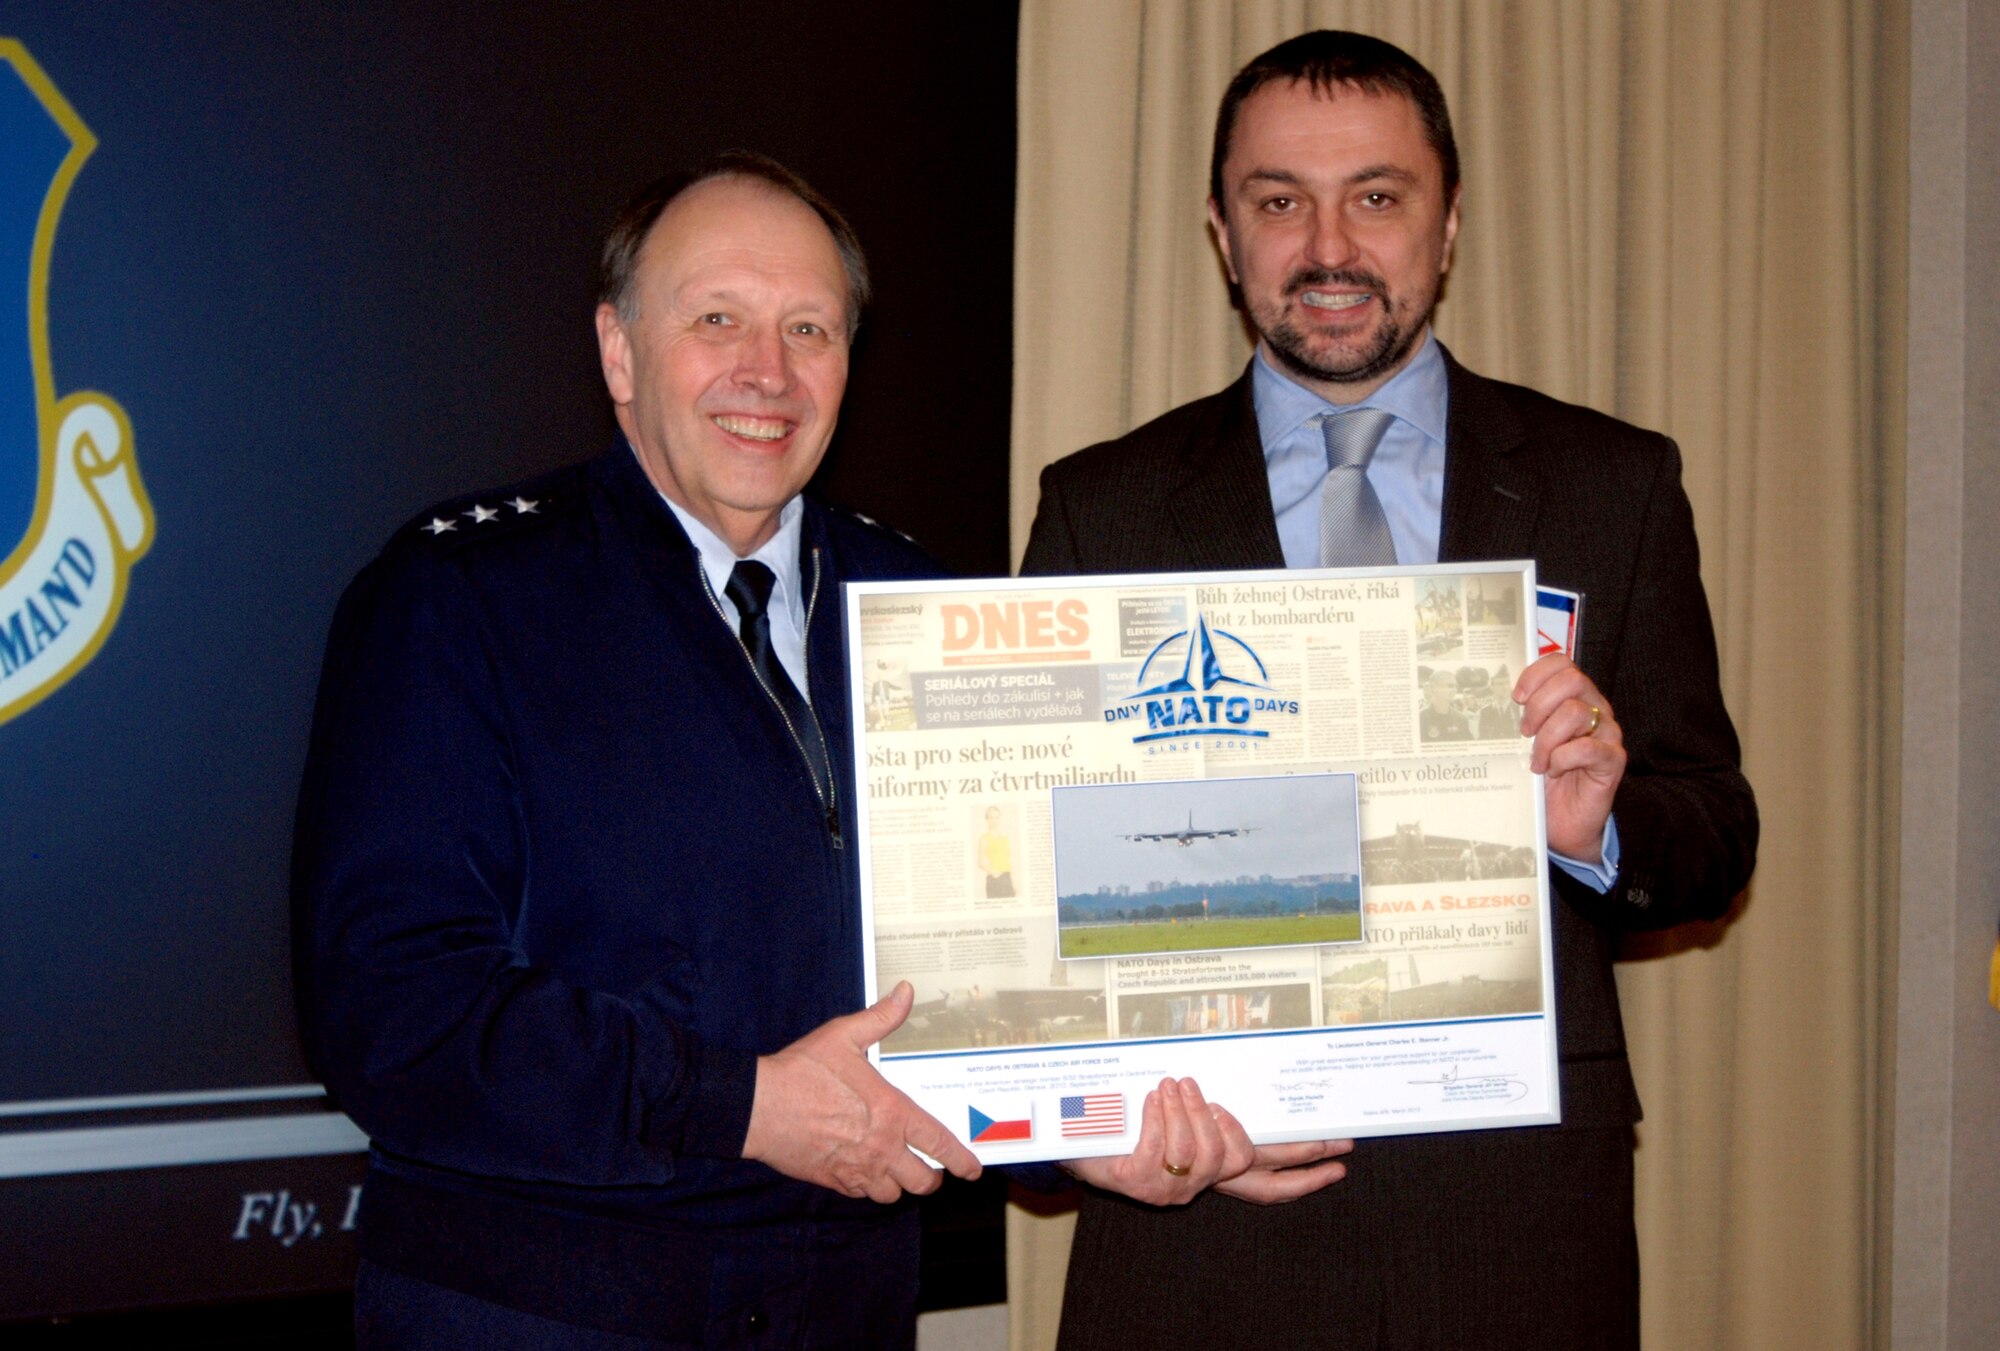 Lt. Gen. Charles E. Stenner, Jr., commander, Air Force Reserve Command, receives a commemorative collage from Zbynek Pavlacík, chairman of the Jagello 2000 Association, in the Headquarters AFRC Conference Room here, March. 8. The collage contained a newspaper article regarding AFRC’s 307th Bomber Wing participation in the “NATO Days in Ostrava” air show, along with a photo of the B-52 Bomber and a thank you note from Pavlacík and Brig. Gen. Jiri Verner, the deputy commander of the Joint Forces - Air Force Commander, Czech Republic.  Jagallo 2000 is a Czech Republic non-government organization specializing in the fields of defense and public diplomacies focusing primarily on raising awareness of and the promotion of international security issues in general public, specifically on the role of the North Atlantic Treaty Organization and the importance of the transatlantic bond between the U.S. and Europe. (U.S. Air Force photo/Peter Chadwick)